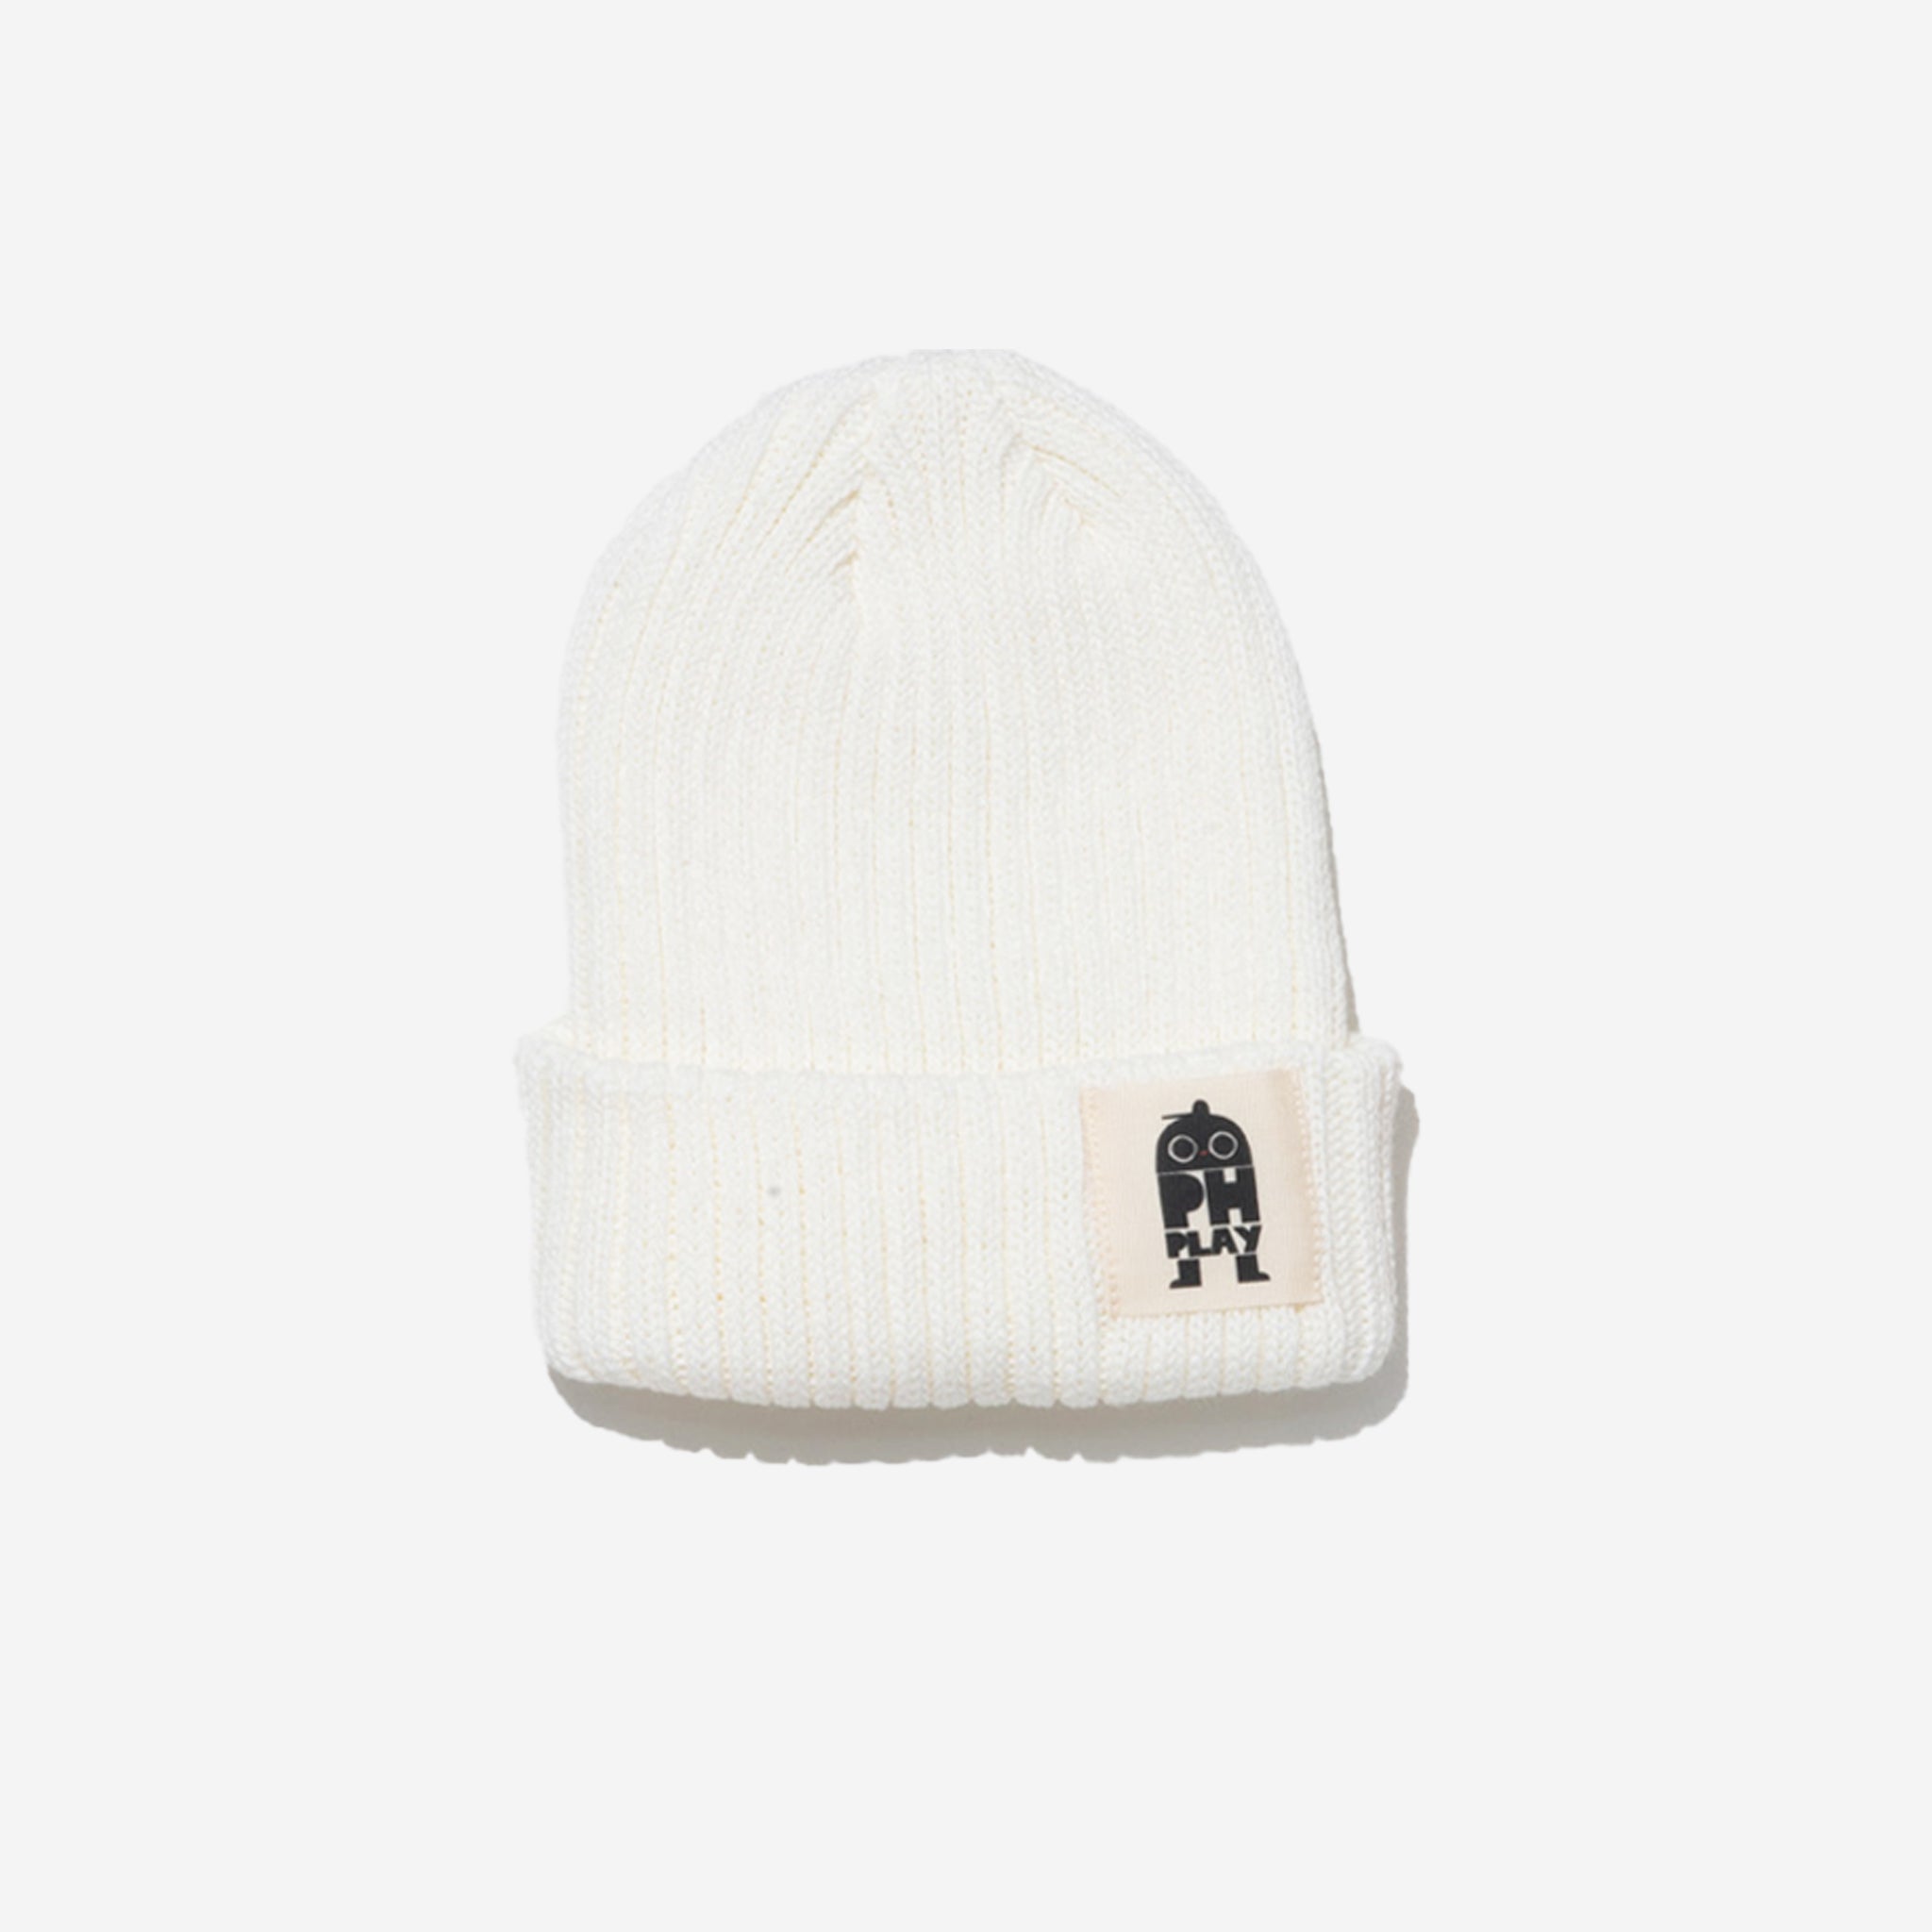 knitted ivory hat with black ph play logo on white background